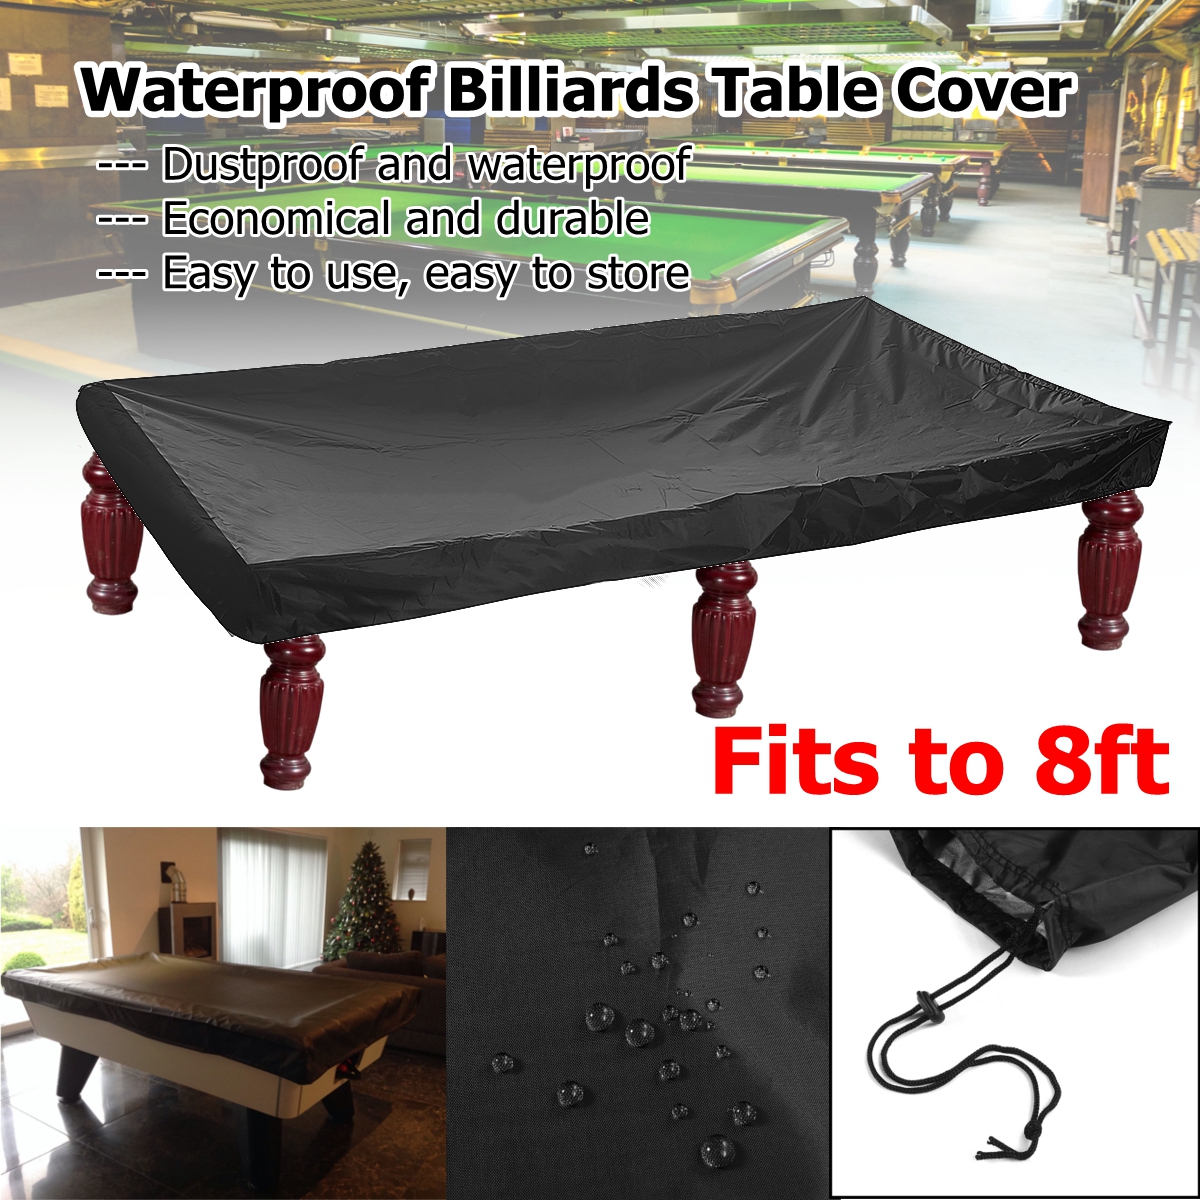 Details about    BLACK PVC Pool Snooker Billiard Table Waterproof Dust Cover for 8' ft pool 